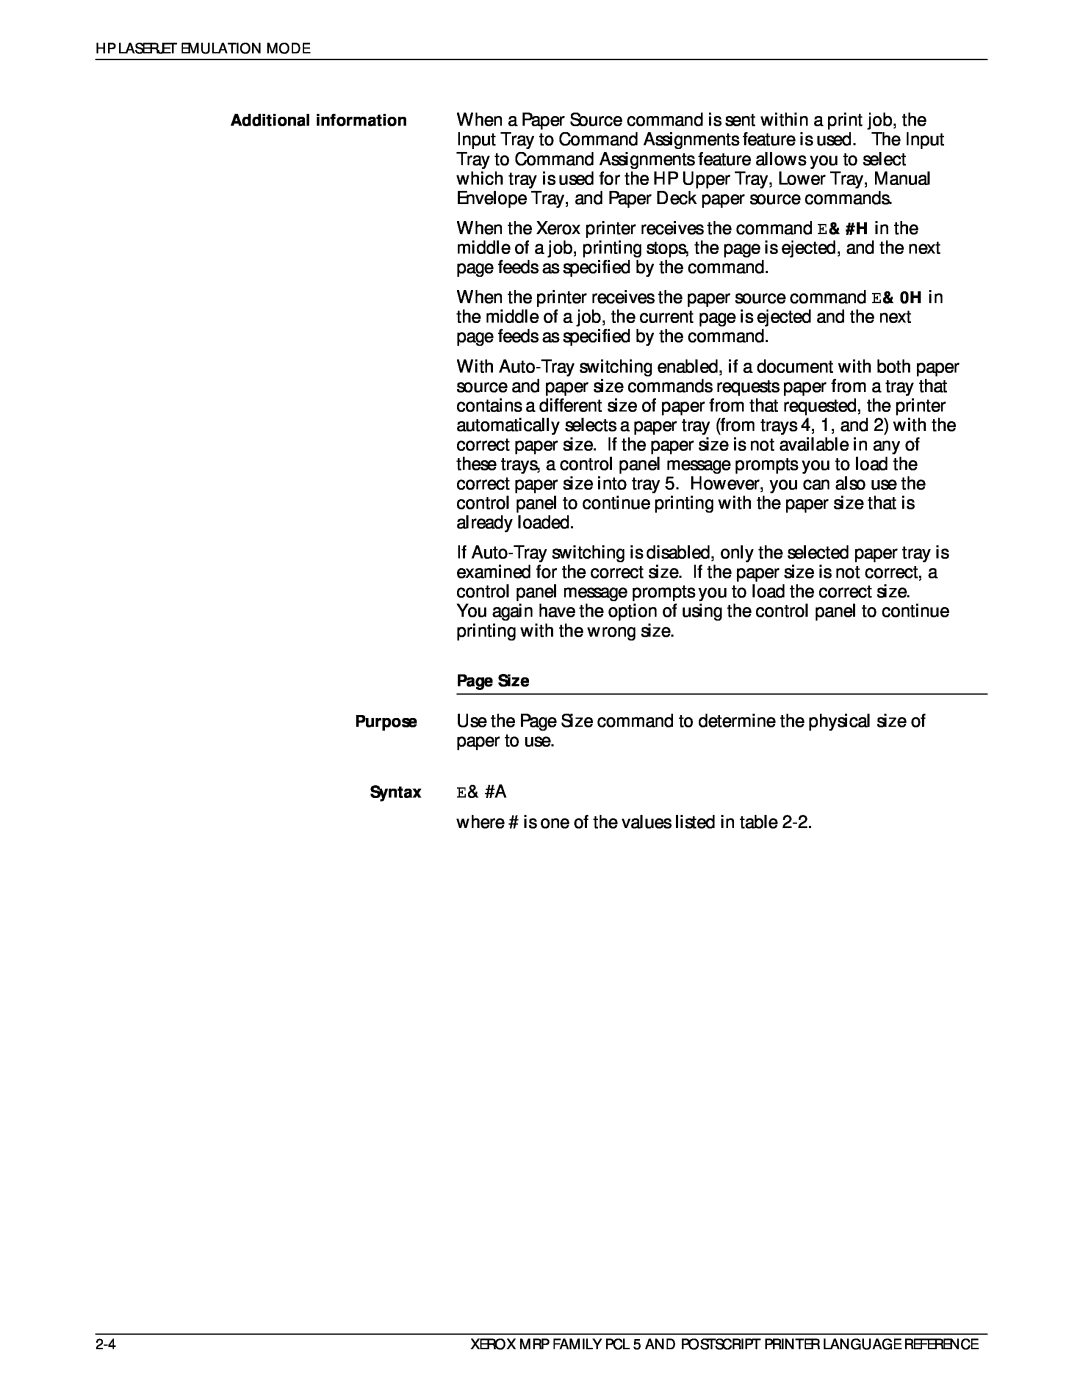 Xerox 4215/MRP manual Page Size, Syntax E& #A 